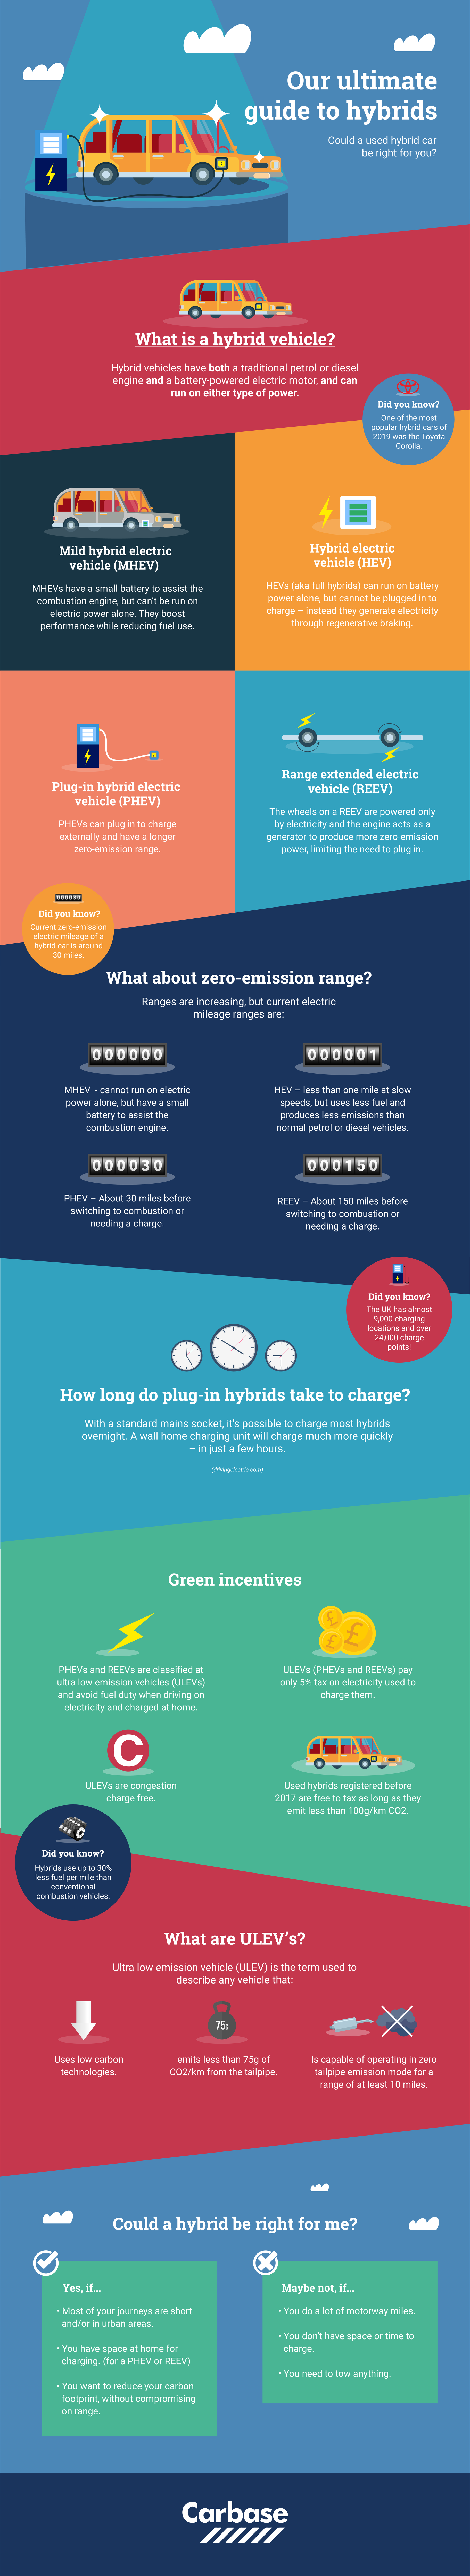 A infographic providing a guide to hybrid cars